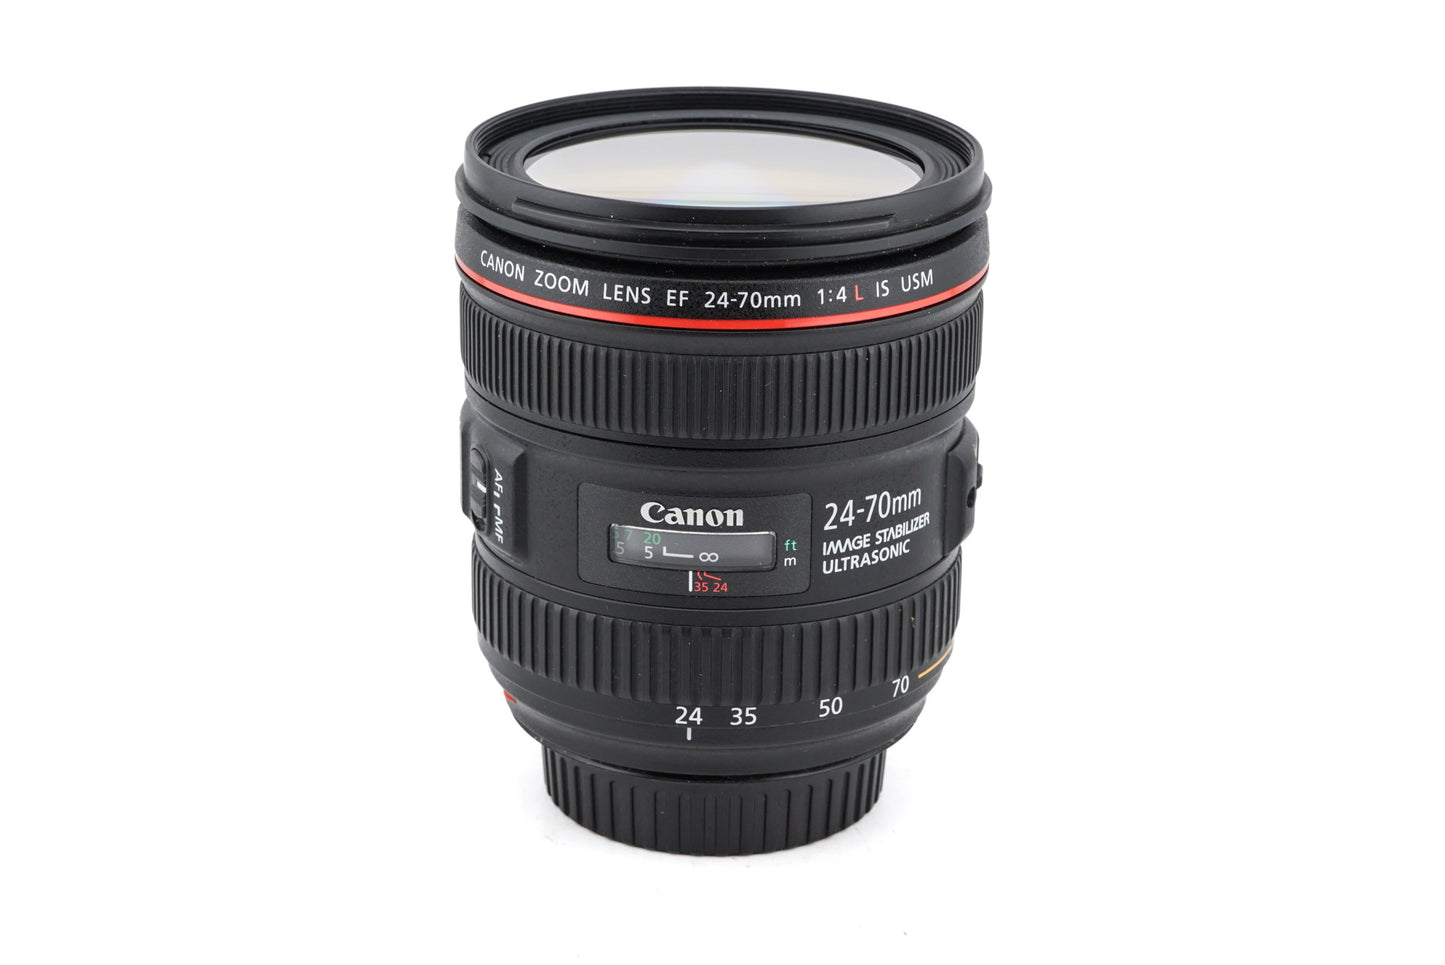 Canon 24-70mm f4 L IS USM - Lens